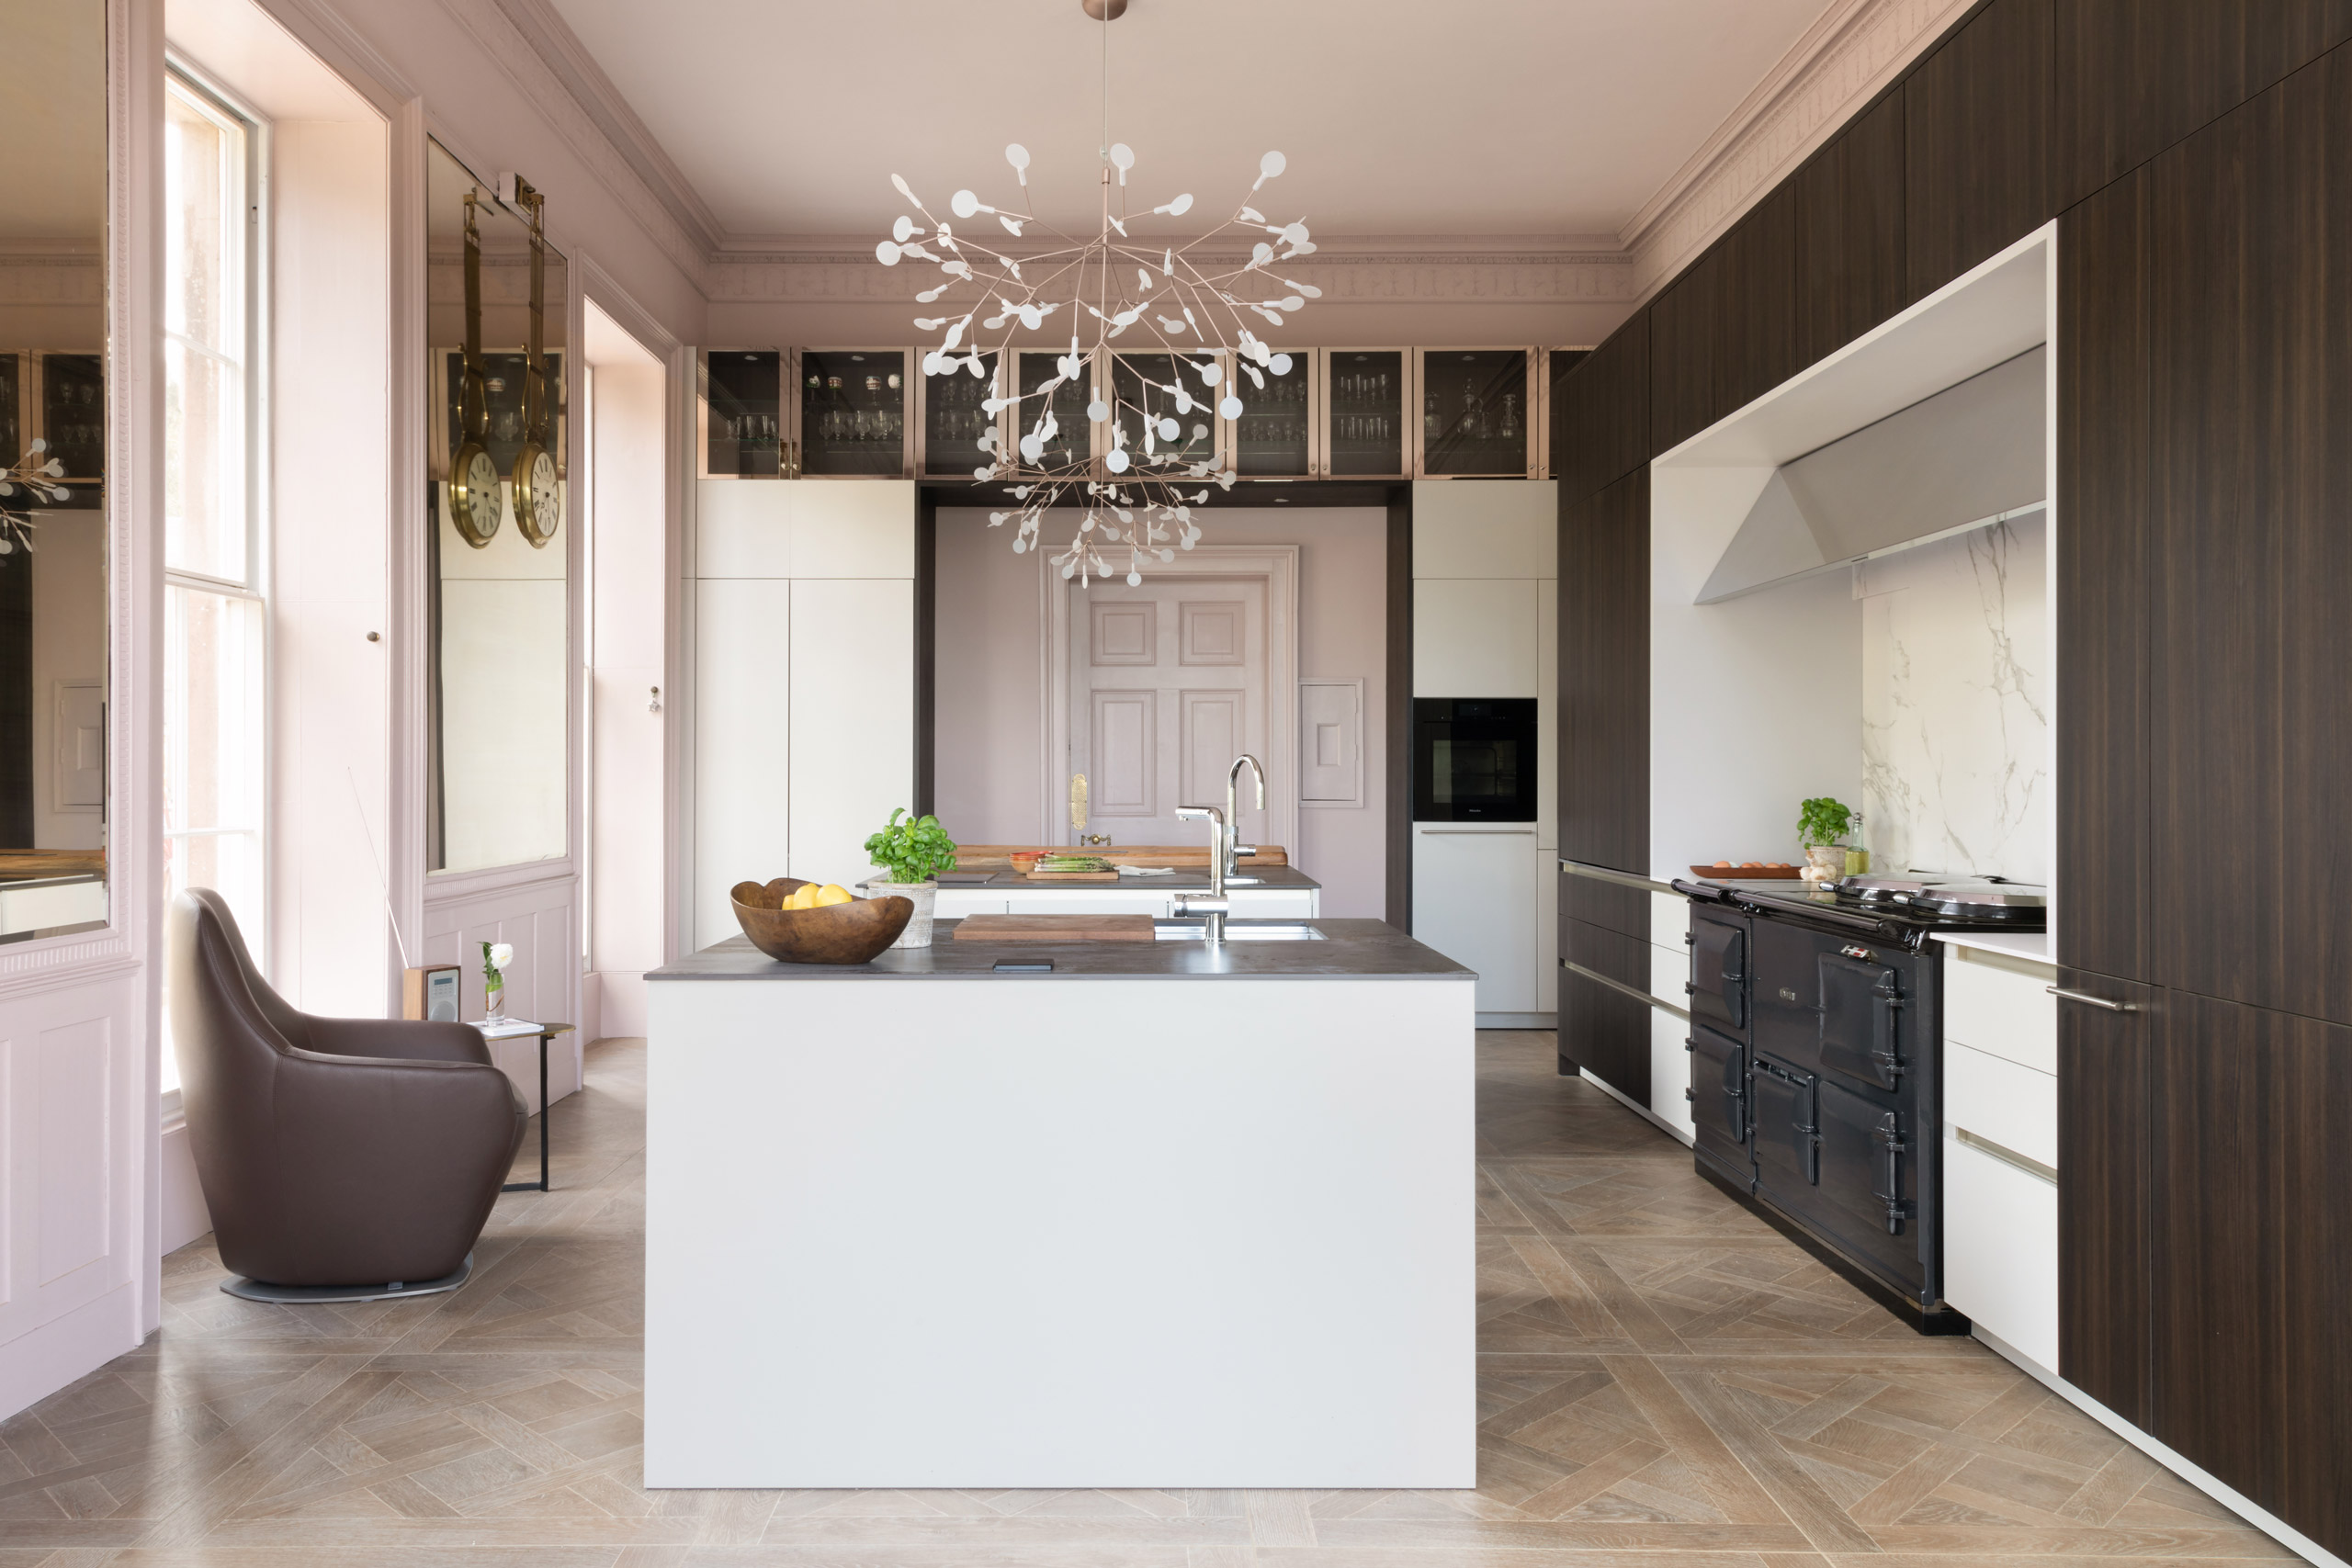 A modern luxury kitchen | island | The Myers Touch